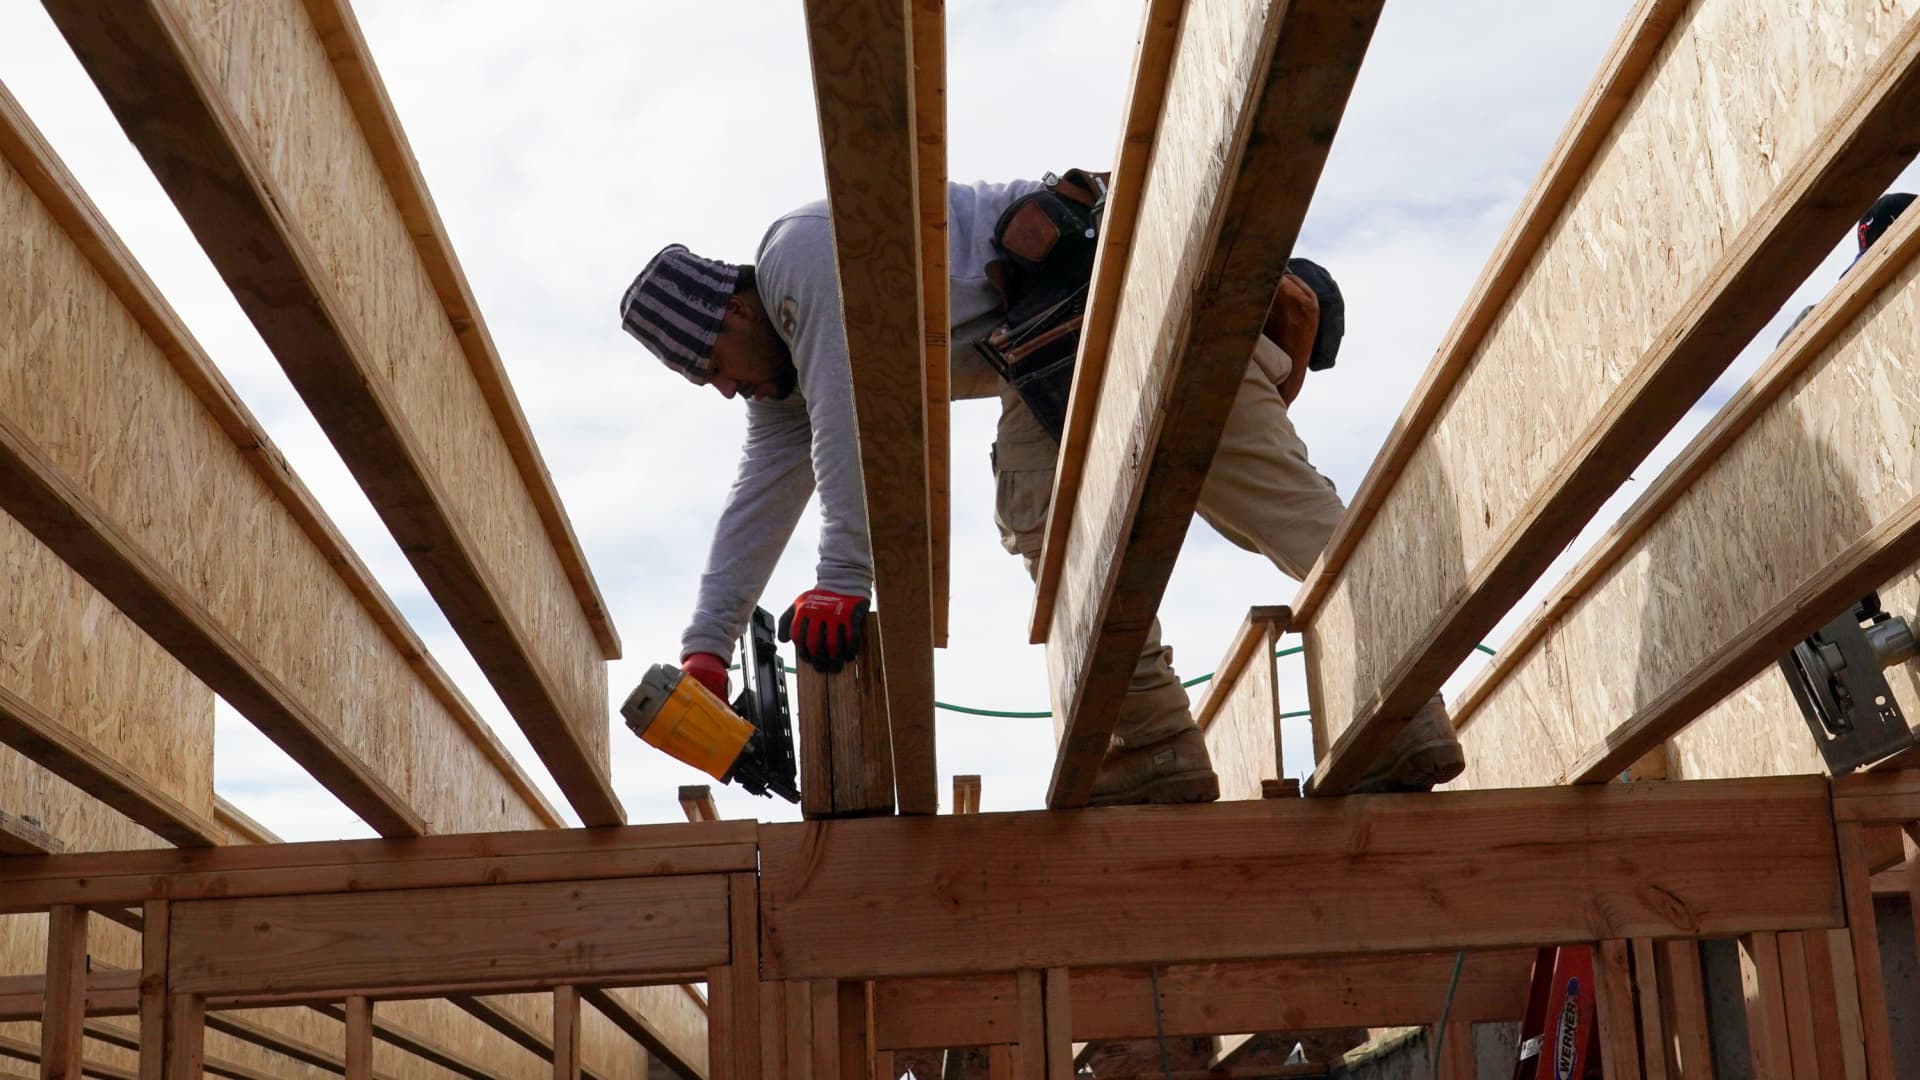 Homebuilders say they’re on the edge of a steeper downturn as buyers pull back